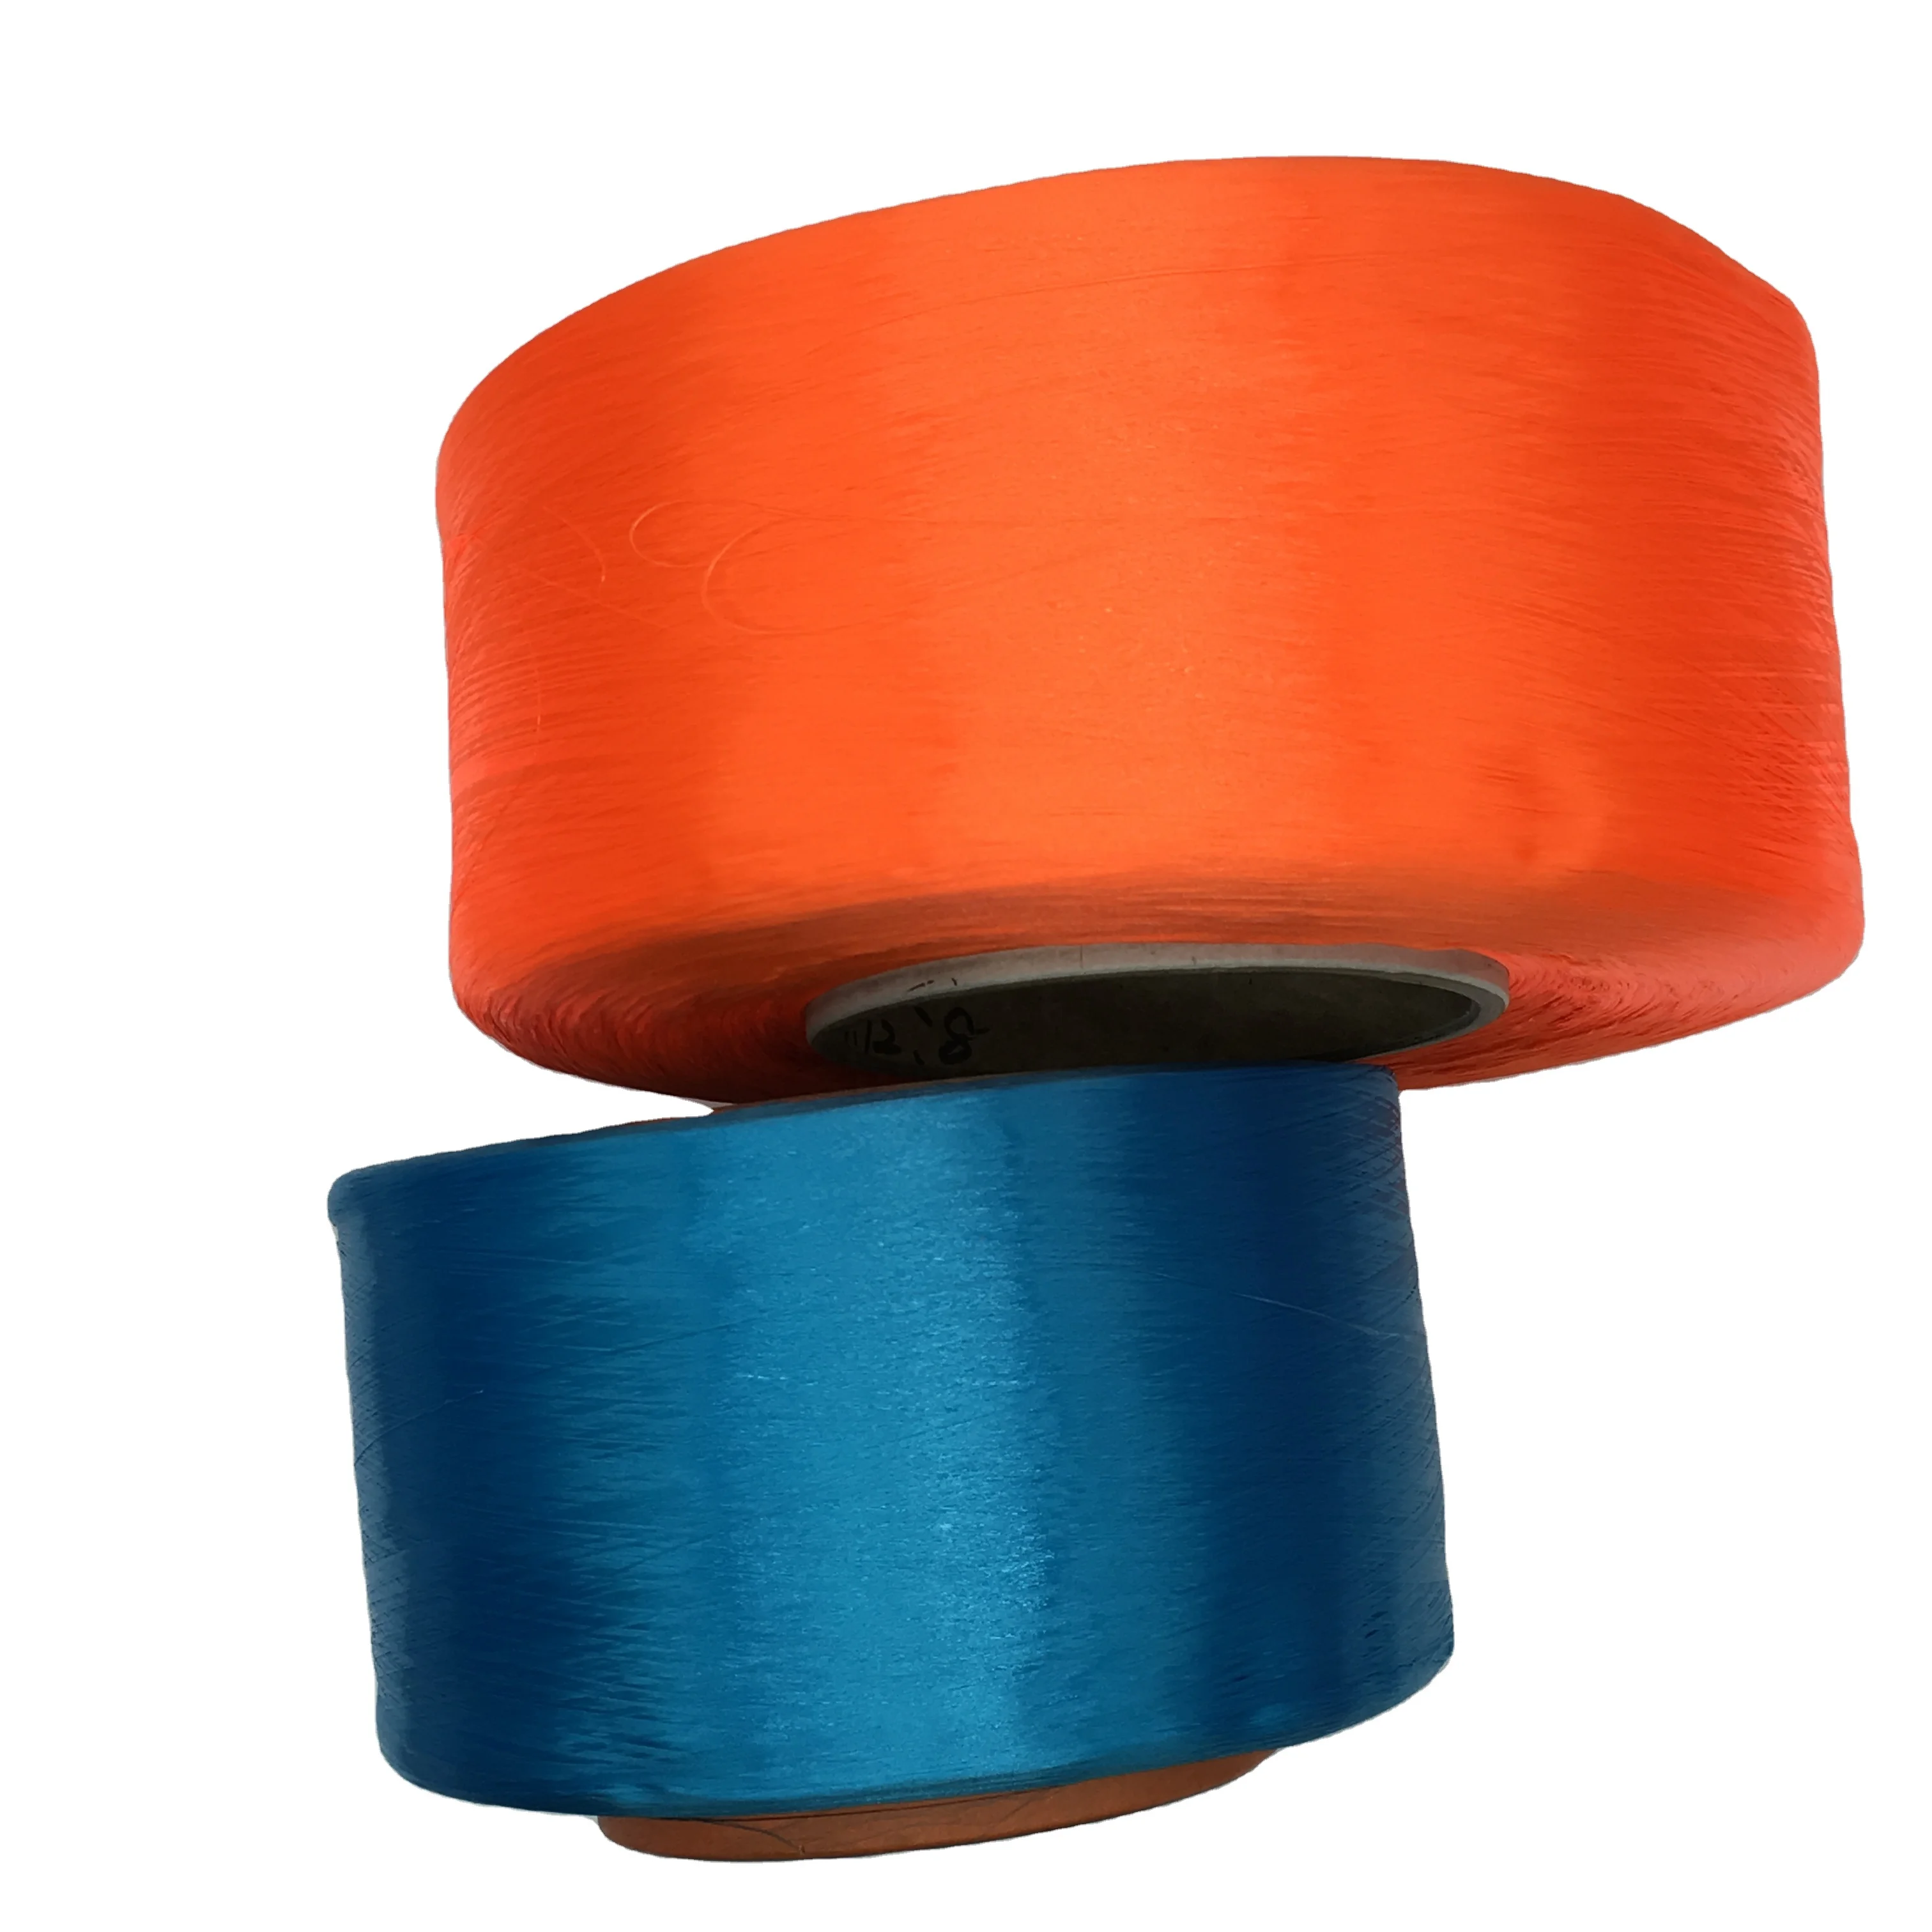 2100dtex nylon 6 ht yarns 7g/d nylon 6 filament yarn with different colors on sale